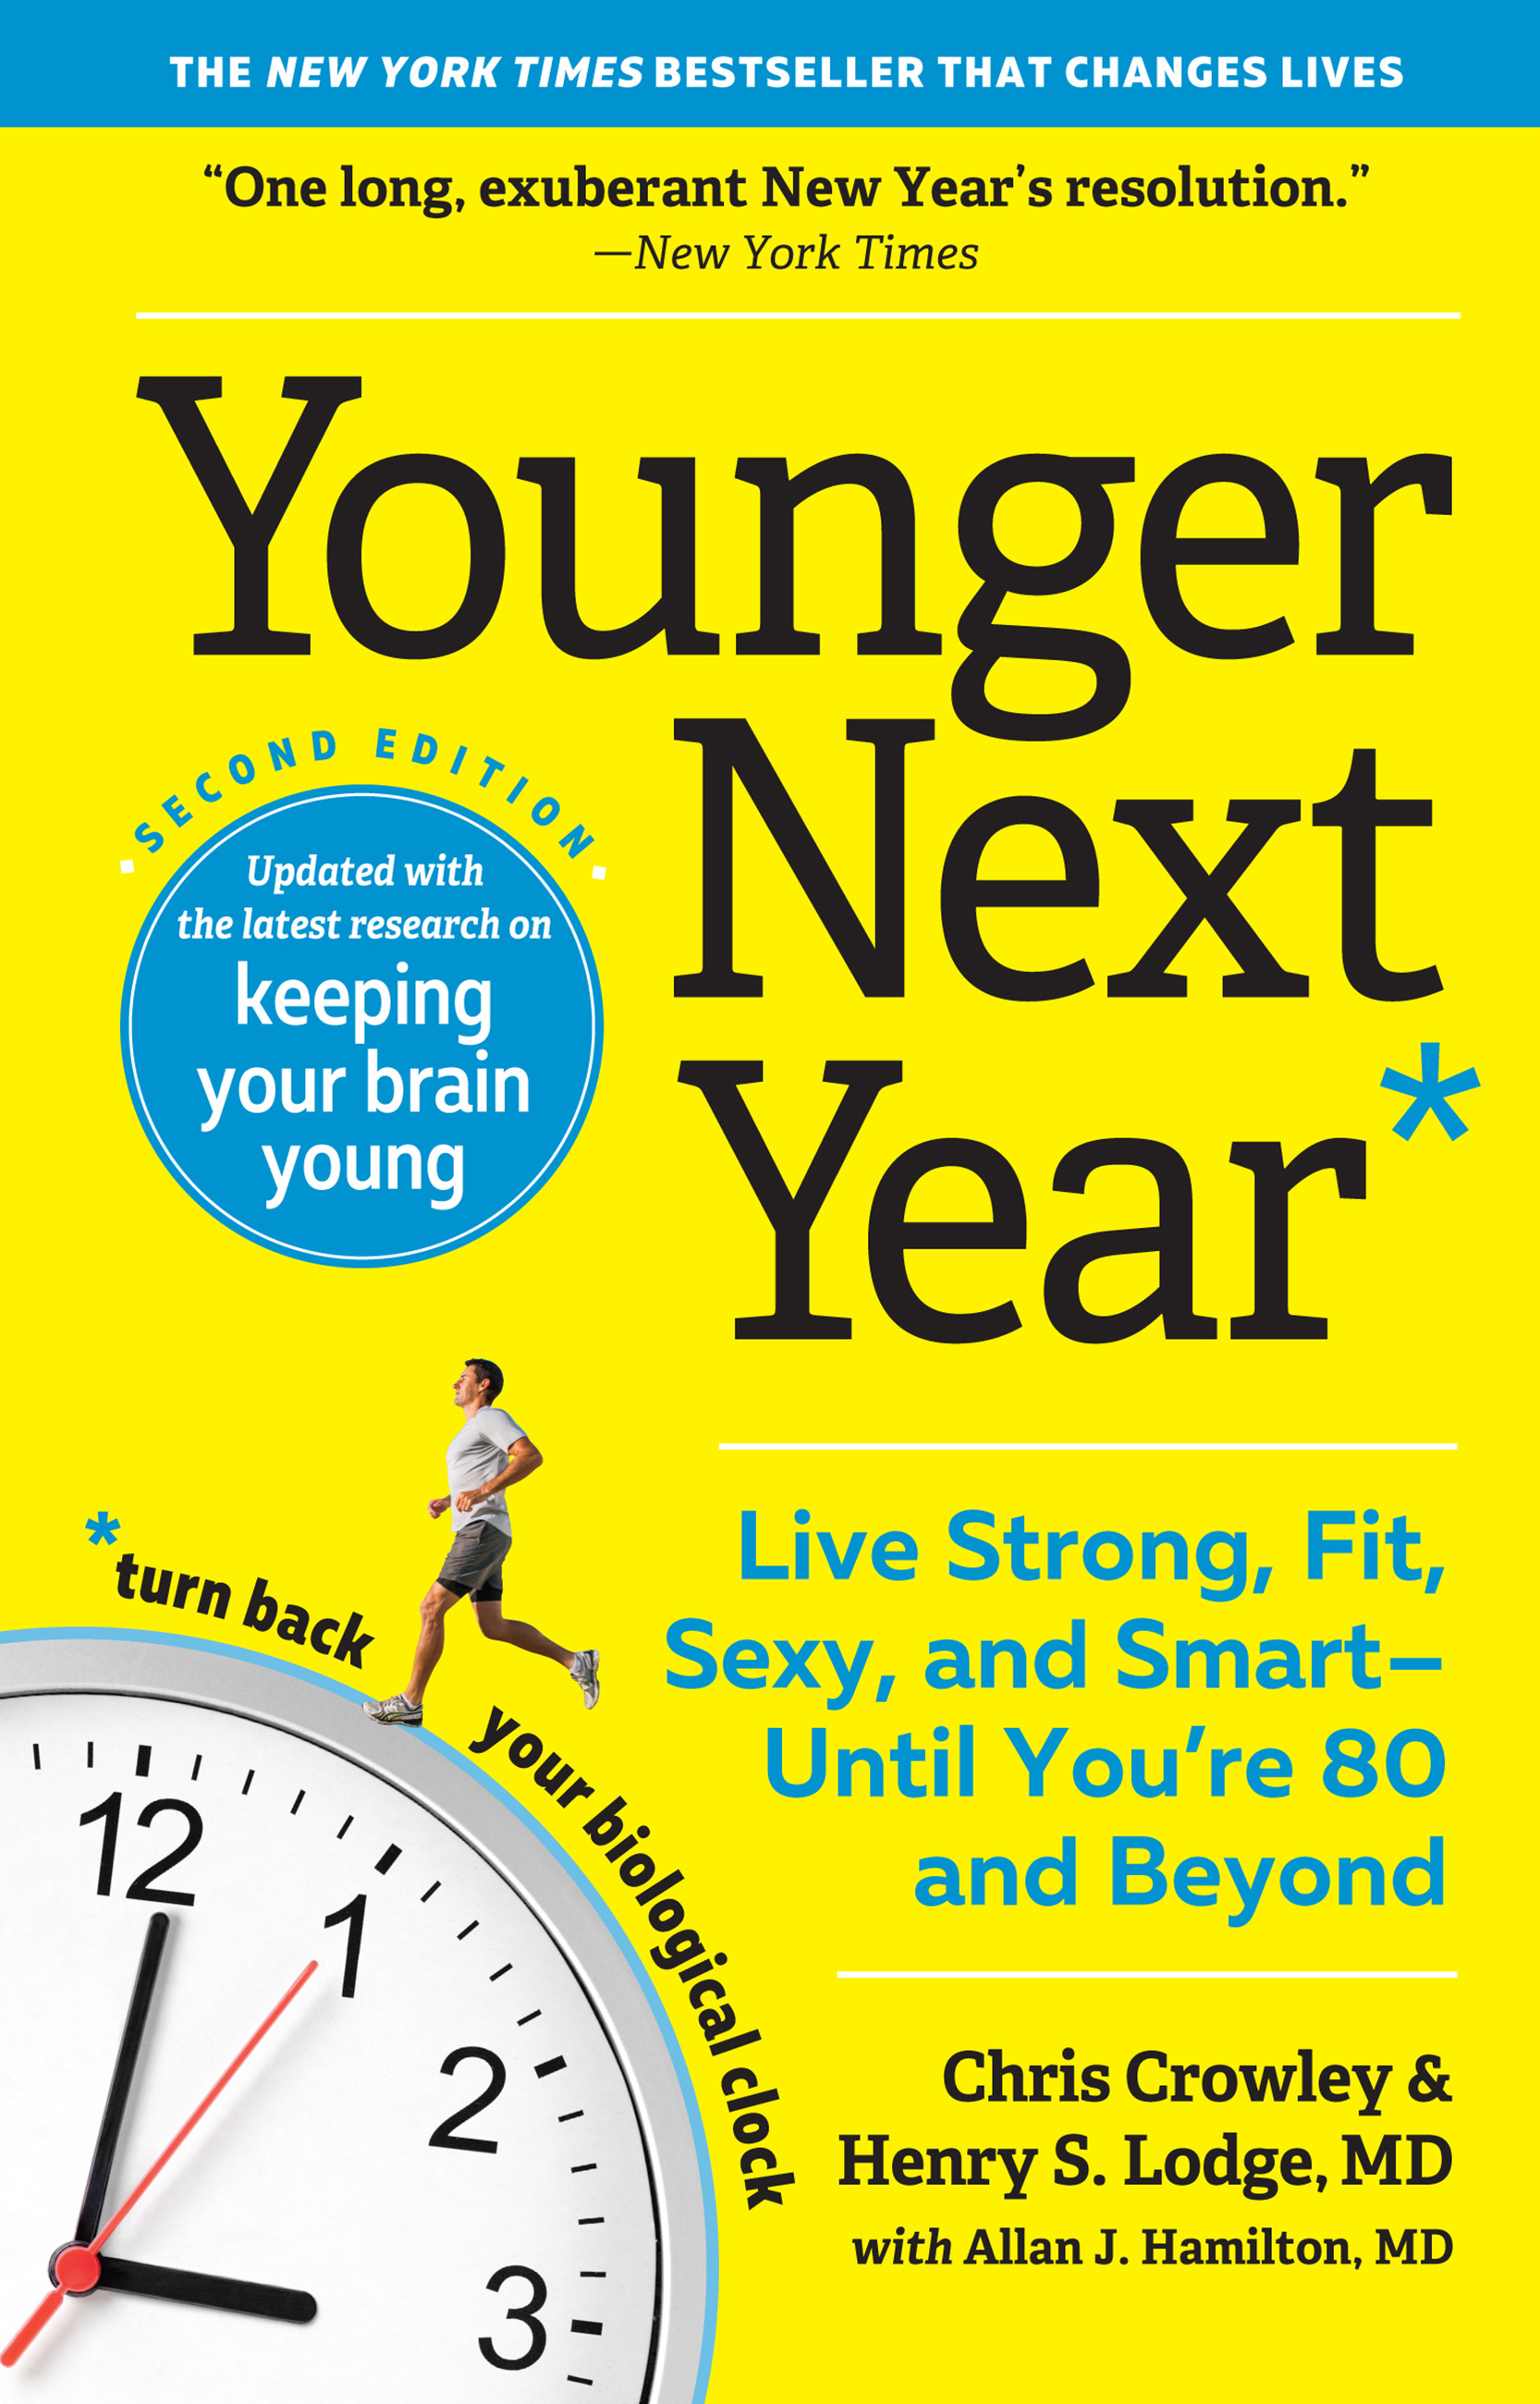 Younger next year live strong, fit, and sexy--until you're 80 and beyond cover image